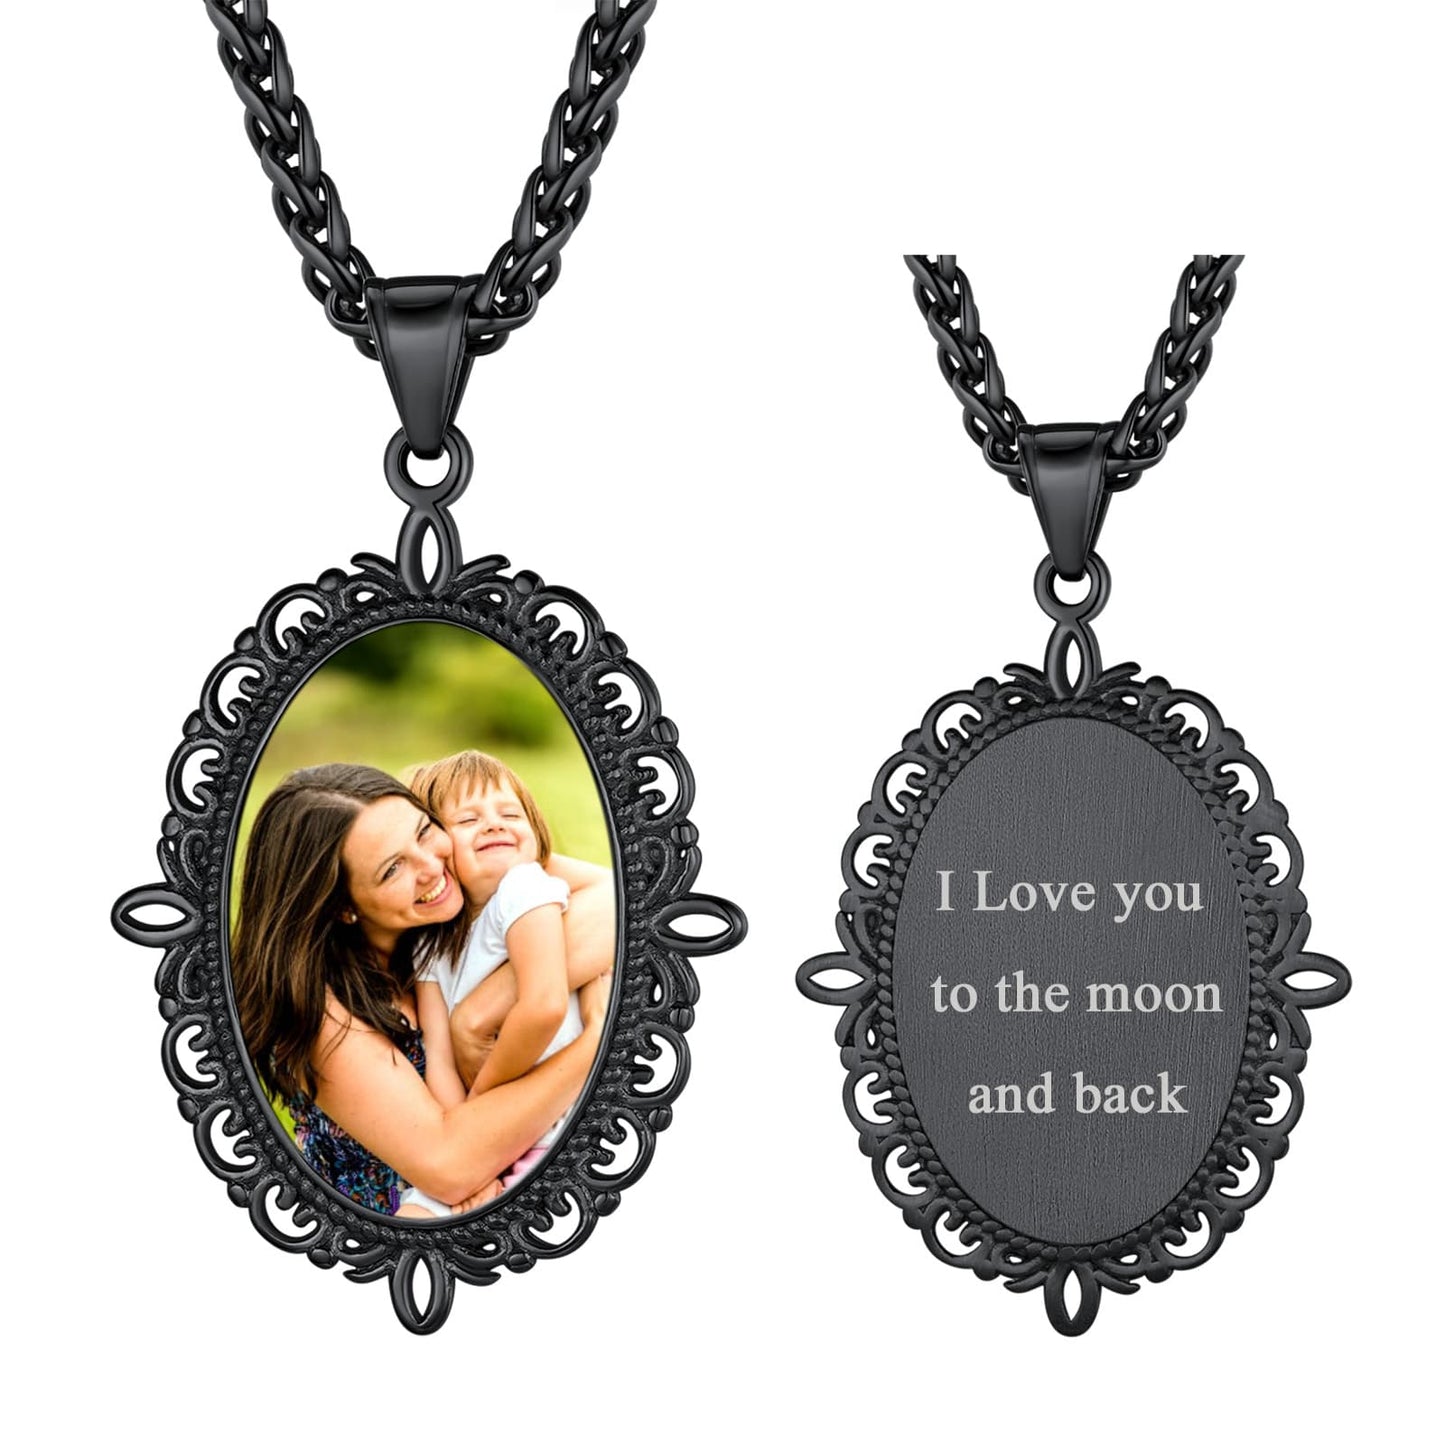 Birthstonesjewelry Personalized Oval Picture Necklace with Message Black Plated